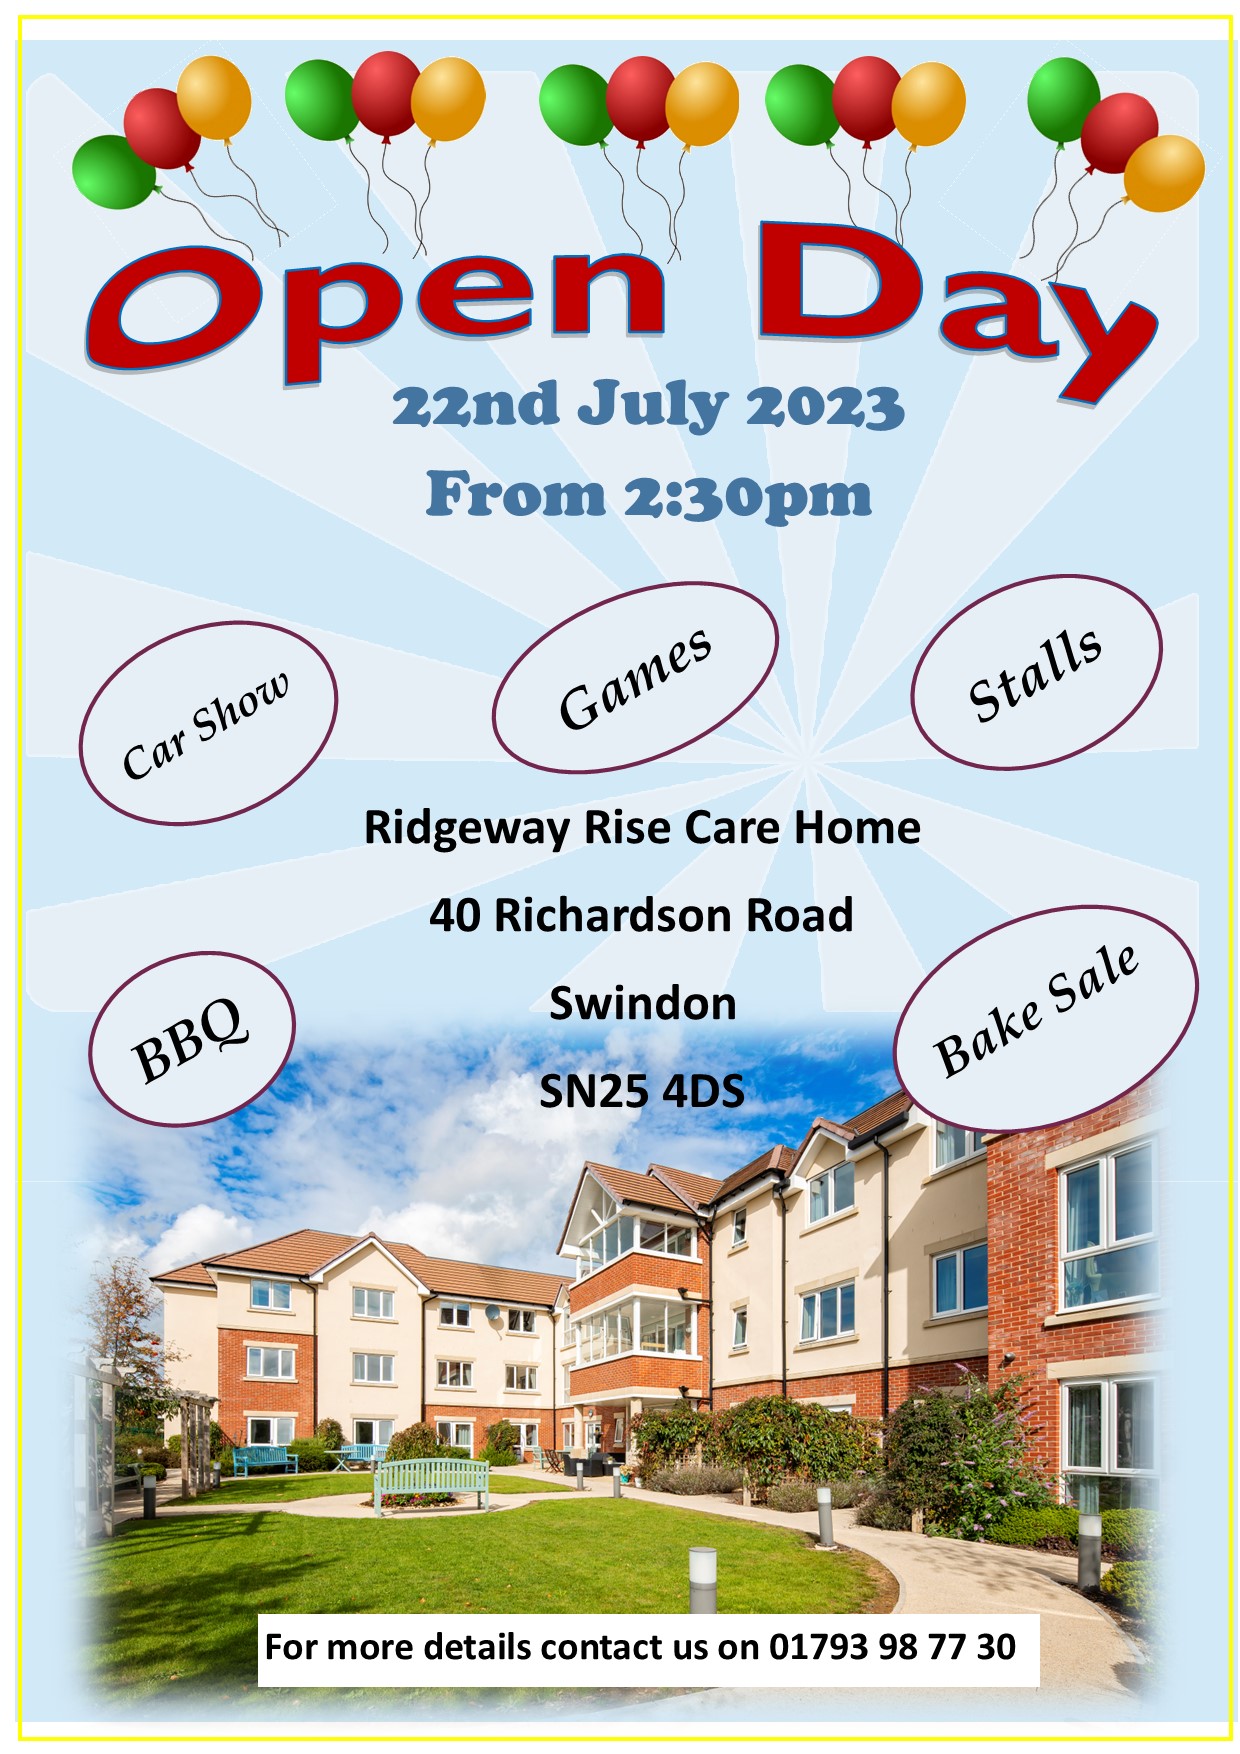 The poster for our open day at Ridgeway Rise Care Home